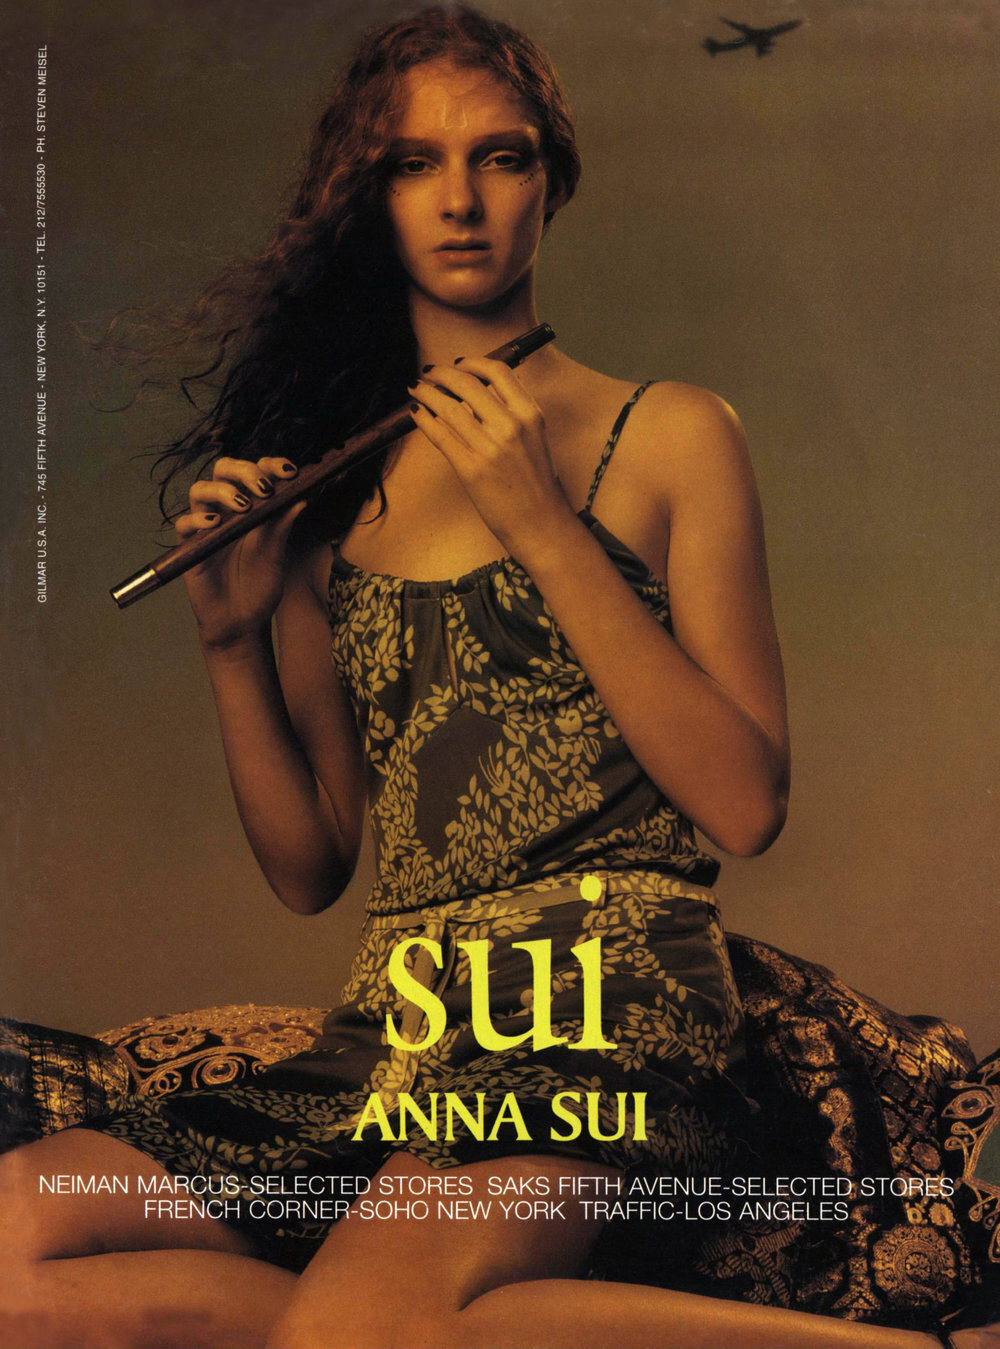 An ad for "Sui", her diffusion line, for spring 1998.